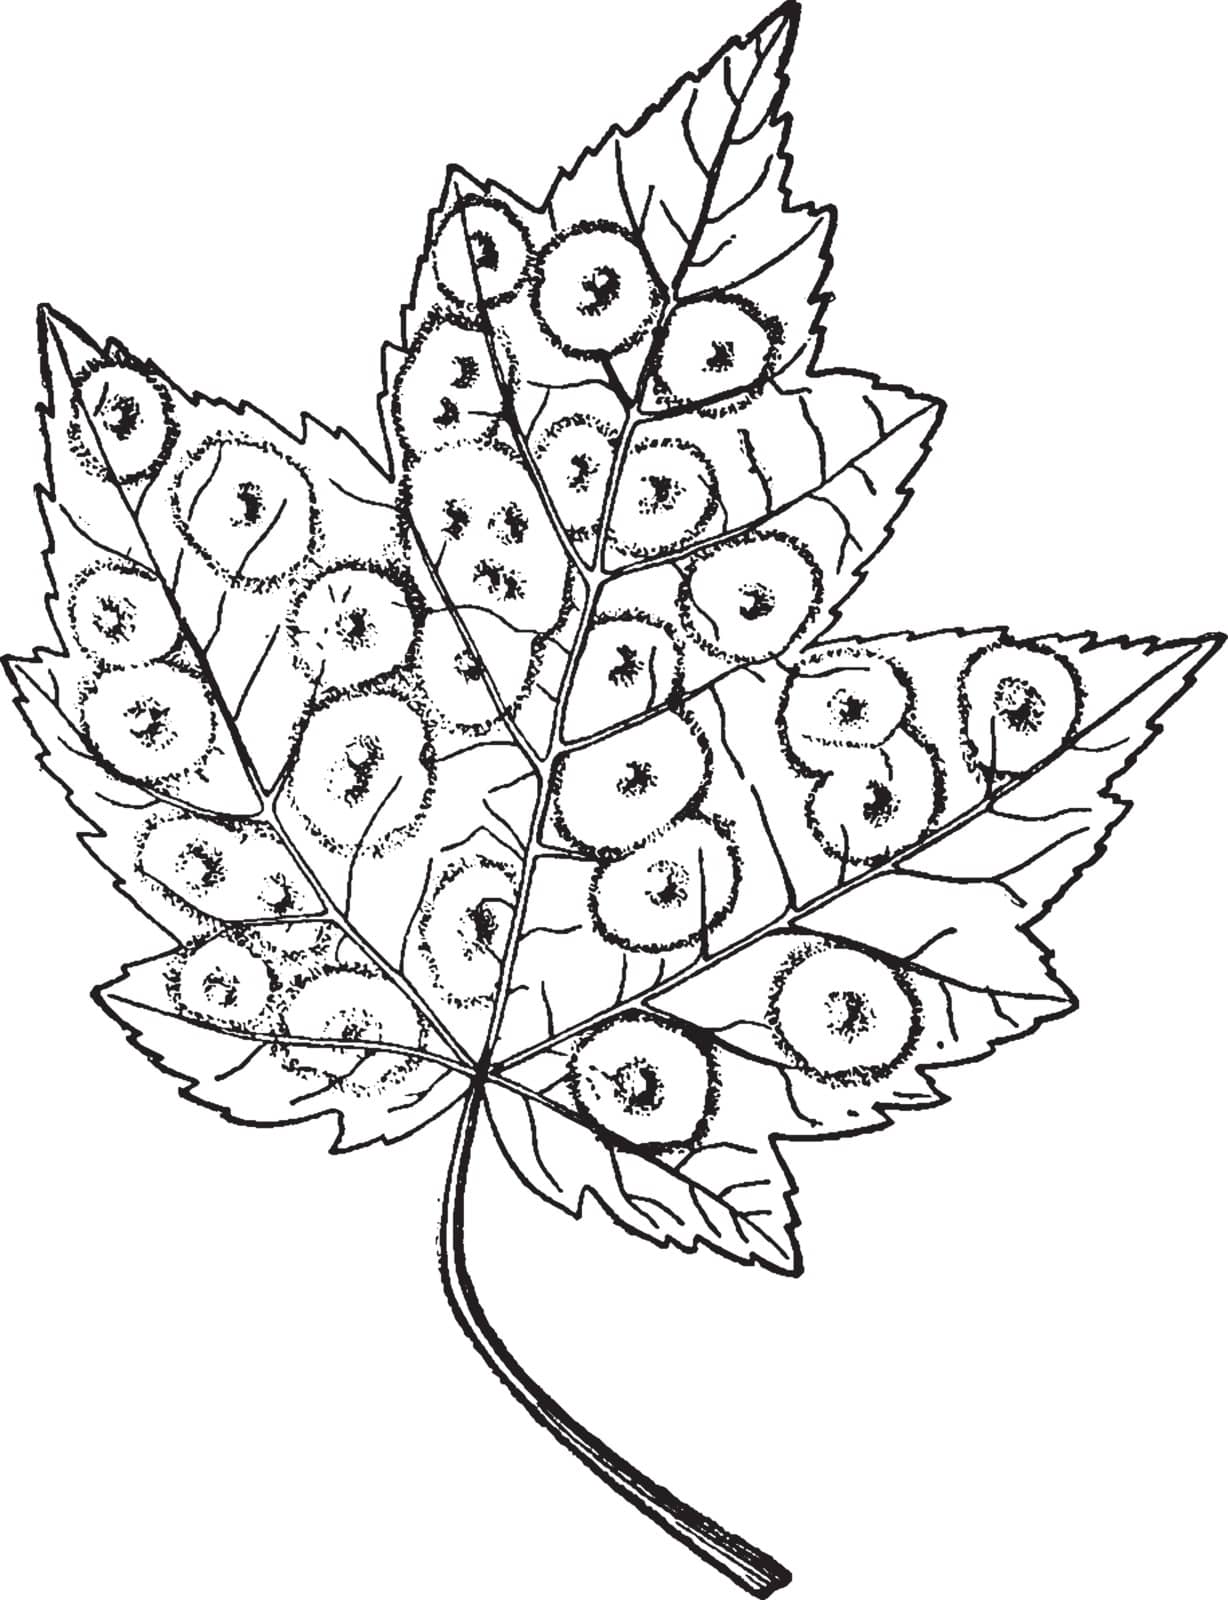 A picture showing the maple spot gall on the leaf of red maple, vintage line drawing or engraving illustration.